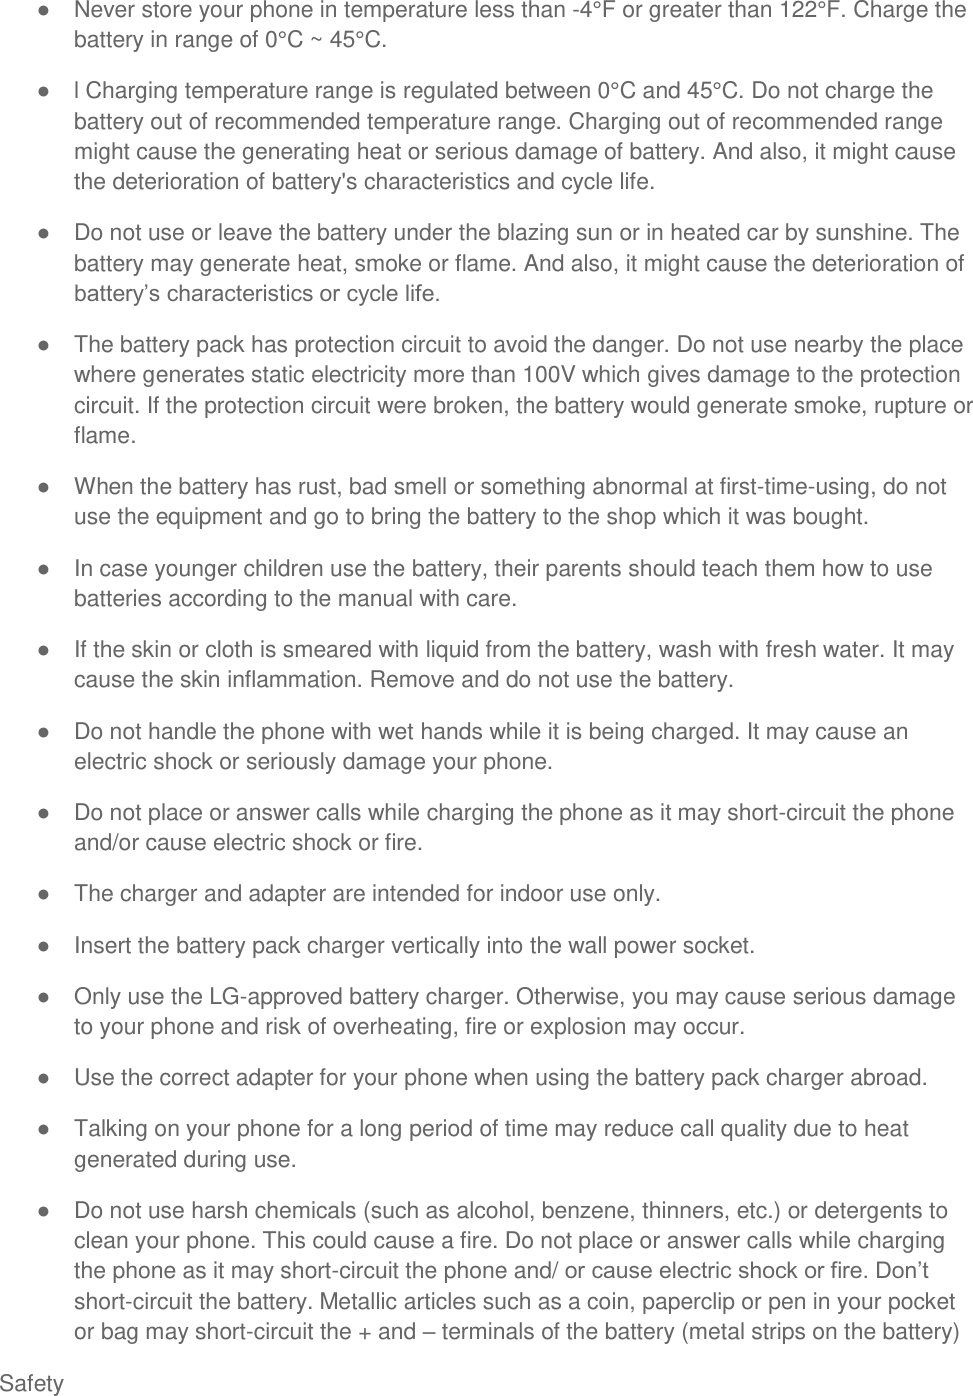  Safety   Never store your phone in temperature less than -4°F or greater than 122°F. Charge the battery in range of 0°C ~ 45°C.   l Charging temperature range is regulated between 0°C and 45°C. Do not charge the battery out of recommended temperature range. Charging out of recommended range might cause the generating heat or serious damage of battery. And also, it might cause the deterioration of battery&apos;s characteristics and cycle life.   Do not use or leave the battery under the blazing sun or in heated car by sunshine. The battery may generate heat, smoke or flame. And also, it might cause the deterioration of    The battery pack has protection circuit to avoid the danger. Do not use nearby the place where generates static electricity more than 100V which gives damage to the protection circuit. If the protection circuit were broken, the battery would generate smoke, rupture or flame.   When the battery has rust, bad smell or something abnormal at first-time-using, do not use the equipment and go to bring the battery to the shop which it was bought.   In case younger children use the battery, their parents should teach them how to use batteries according to the manual with care.   If the skin or cloth is smeared with liquid from the battery, wash with fresh water. It may cause the skin inflammation. Remove and do not use the battery.   Do not handle the phone with wet hands while it is being charged. It may cause an electric shock or seriously damage your phone.   Do not place or answer calls while charging the phone as it may short-circuit the phone and/or cause electric shock or fire.   The charger and adapter are intended for indoor use only.   Insert the battery pack charger vertically into the wall power socket.   Only use the LG-approved battery charger. Otherwise, you may cause serious damage to your phone and risk of overheating, fire or explosion may occur.   Use the correct adapter for your phone when using the battery pack charger abroad.   Talking on your phone for a long period of time may reduce call quality due to heat generated during use.    Do not use harsh chemicals (such as alcohol, benzene, thinners, etc.) or detergents to clean your phone. This could cause a fire. Do not place or answer calls while charging the phone as it may short-circuit the phone and/  short-circuit the battery. Metallic articles such as a coin, paperclip or pen in your pocket or bag may short-circuit the + and  terminals of the battery (metal strips on the battery) 